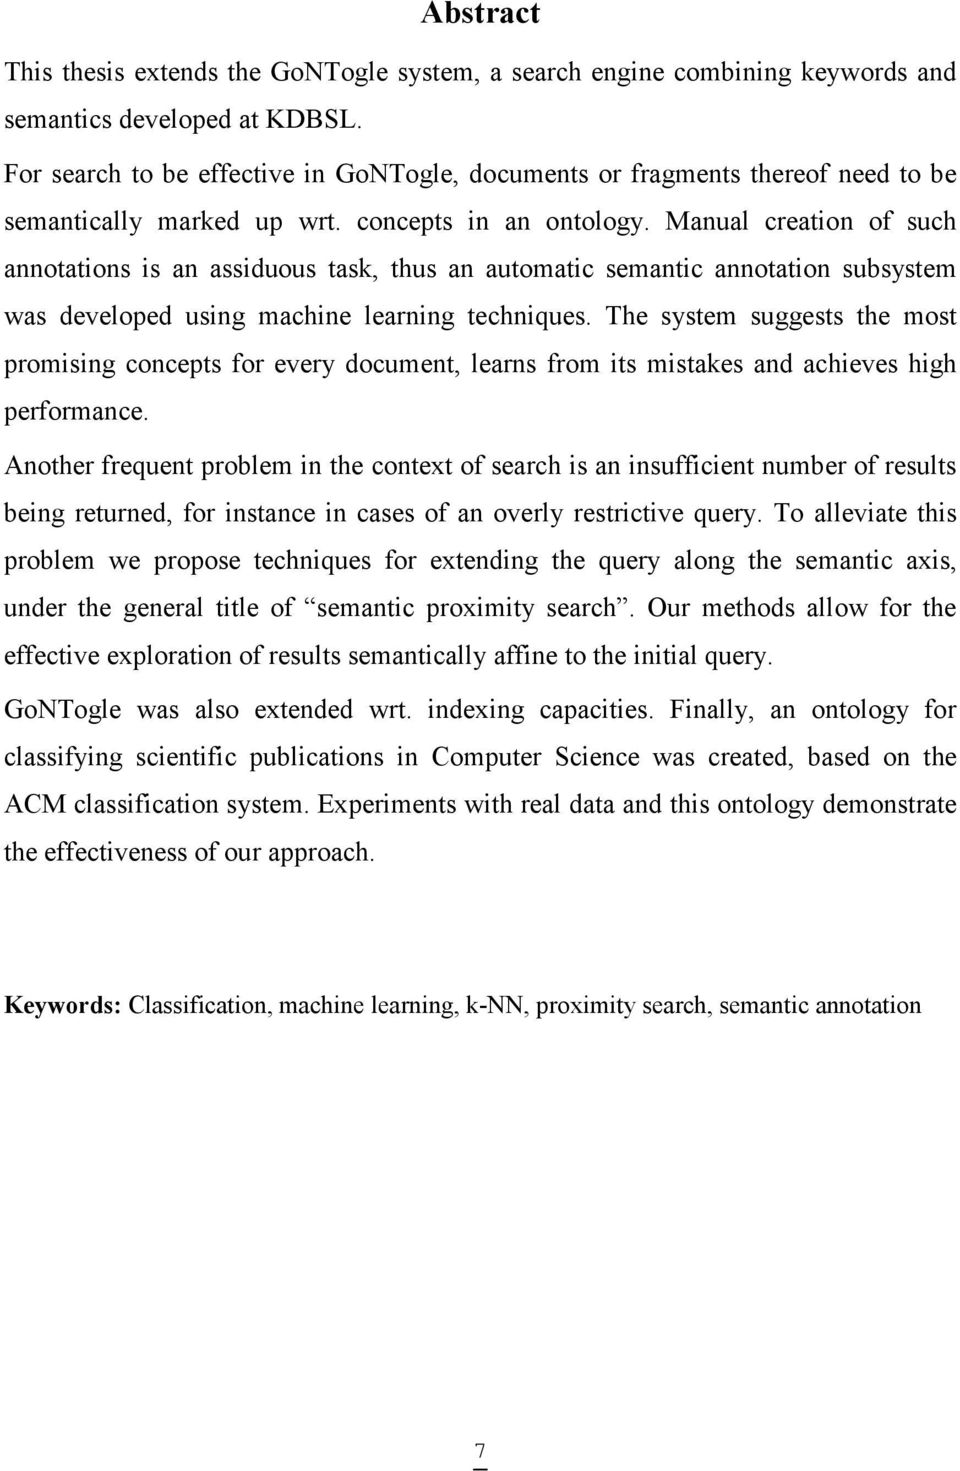 Manual creation of such annotations is an assiduous task, thus an automatic semantic annotation subsystem was developed using machine learning techniques.